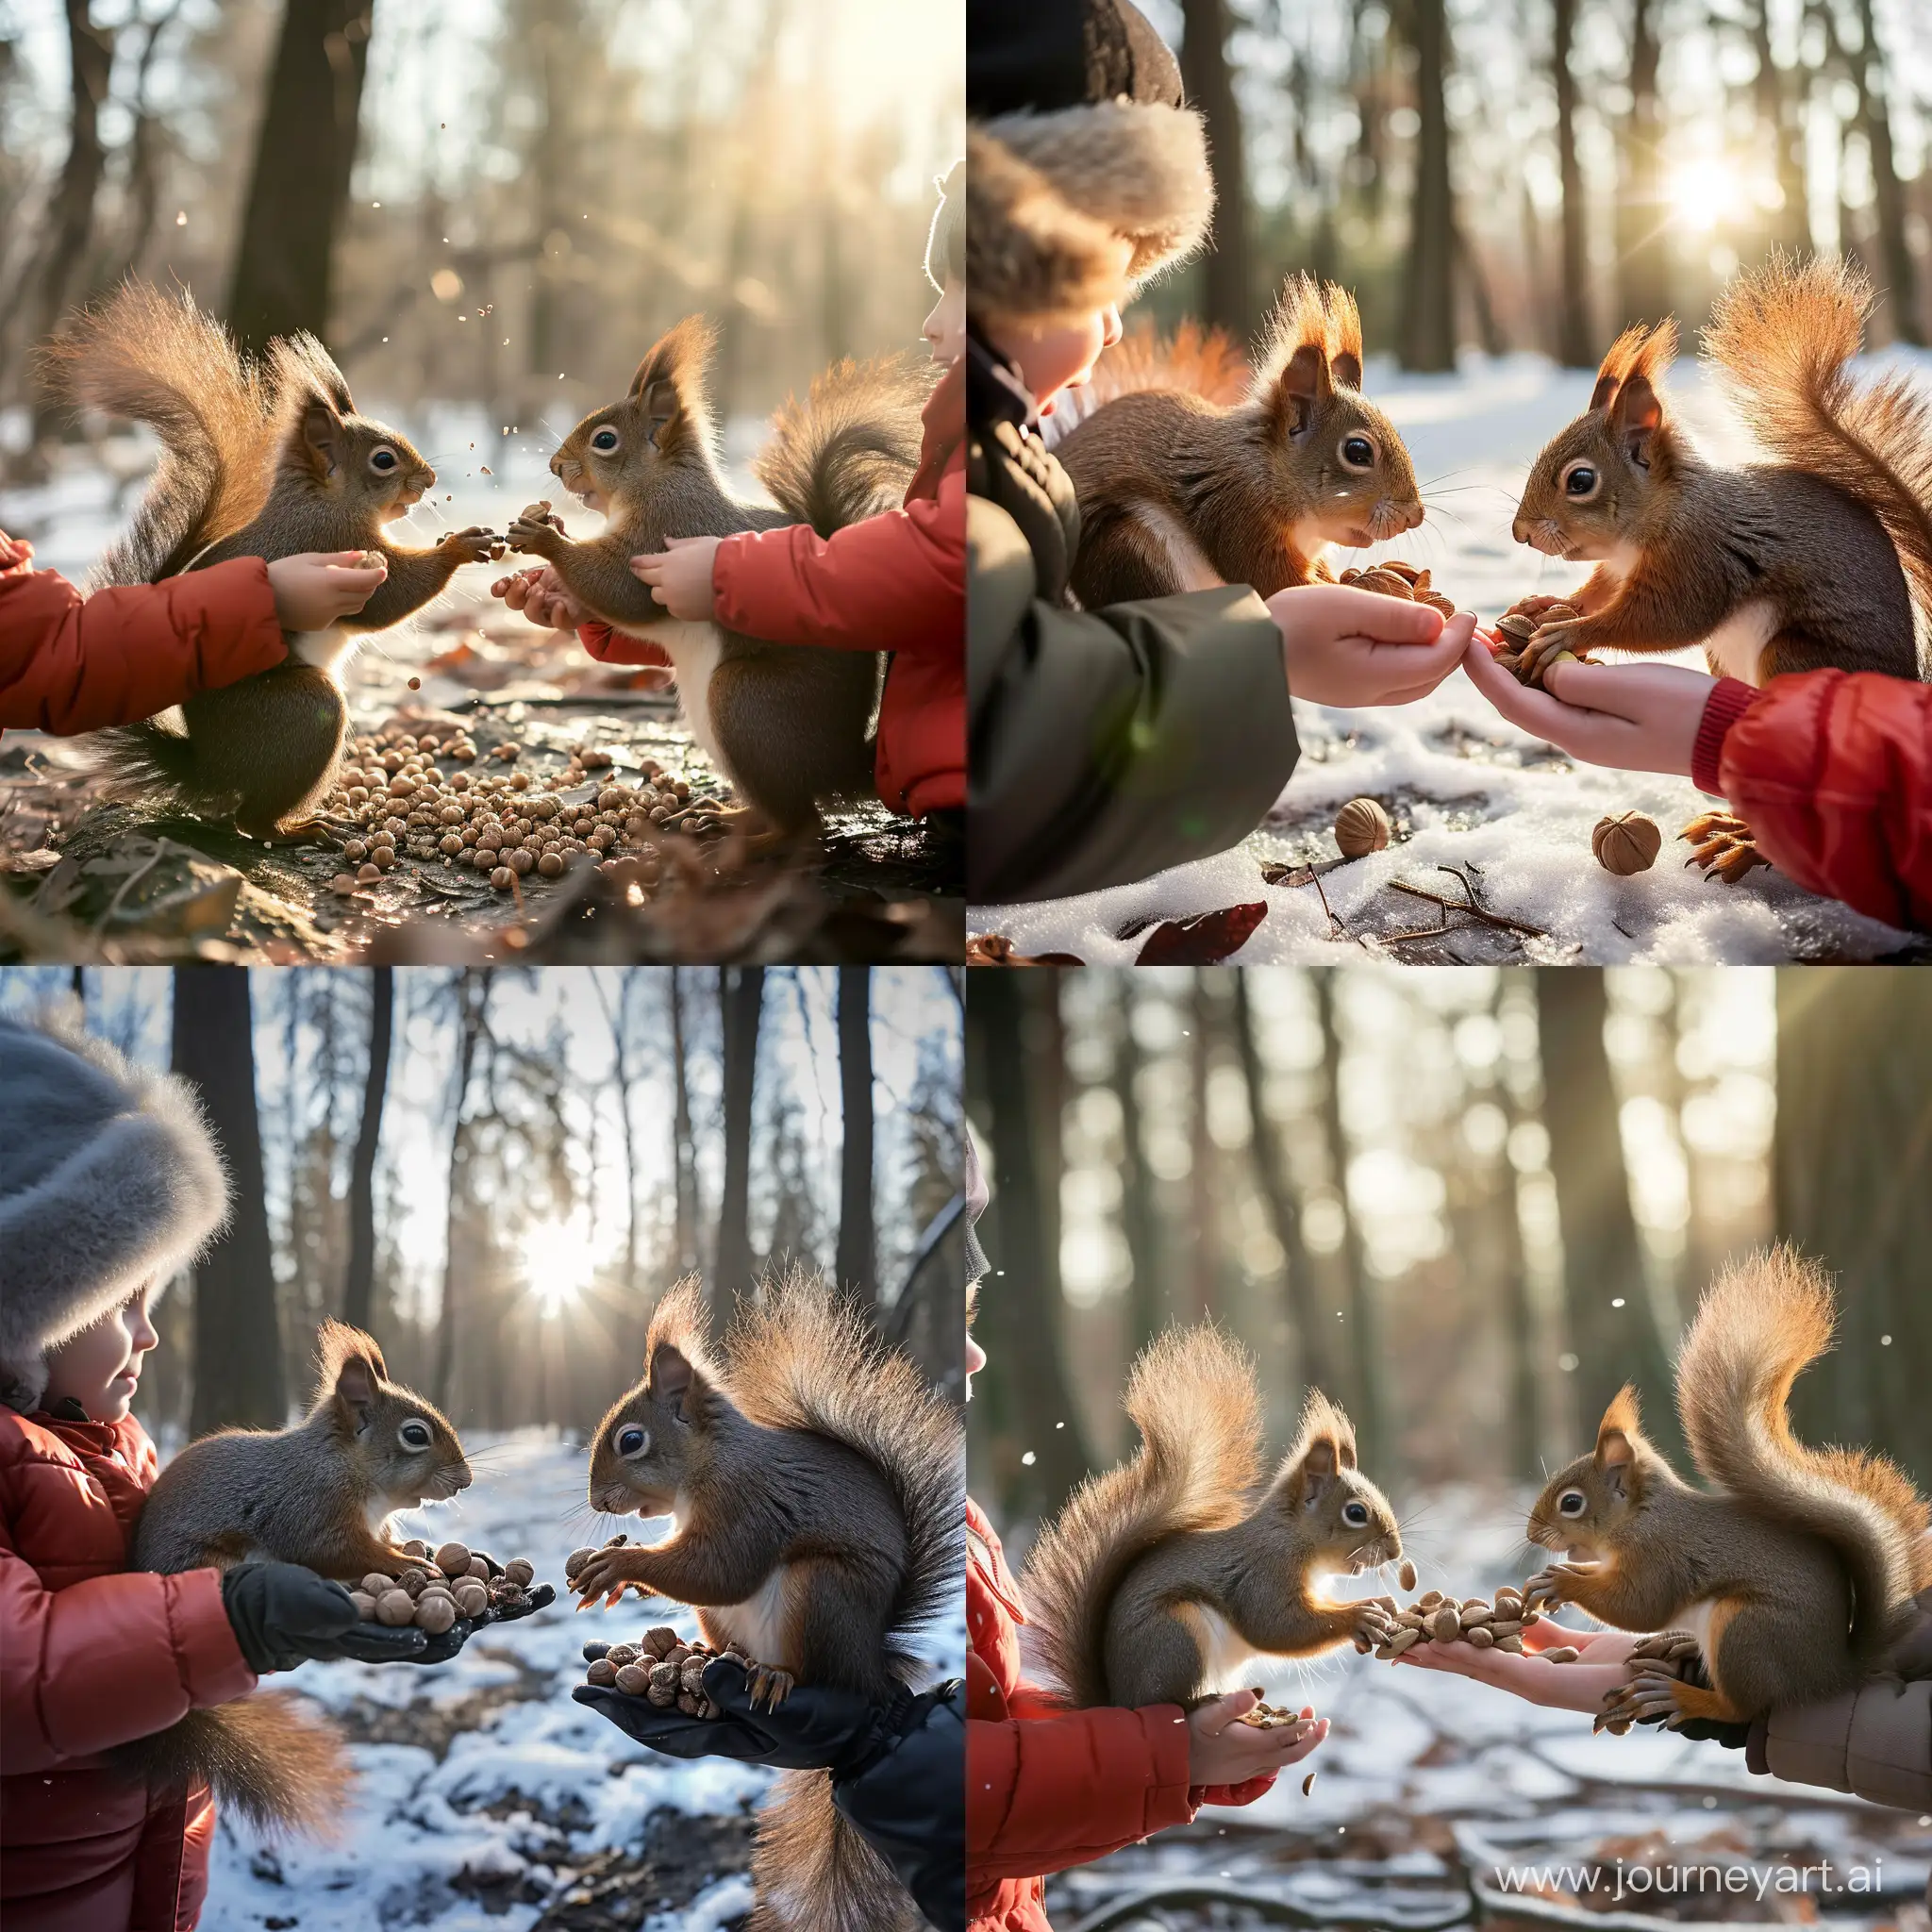 Kids-Feeding-Squirrels-in-Winter-Forest-Hyperrealistic-Photography